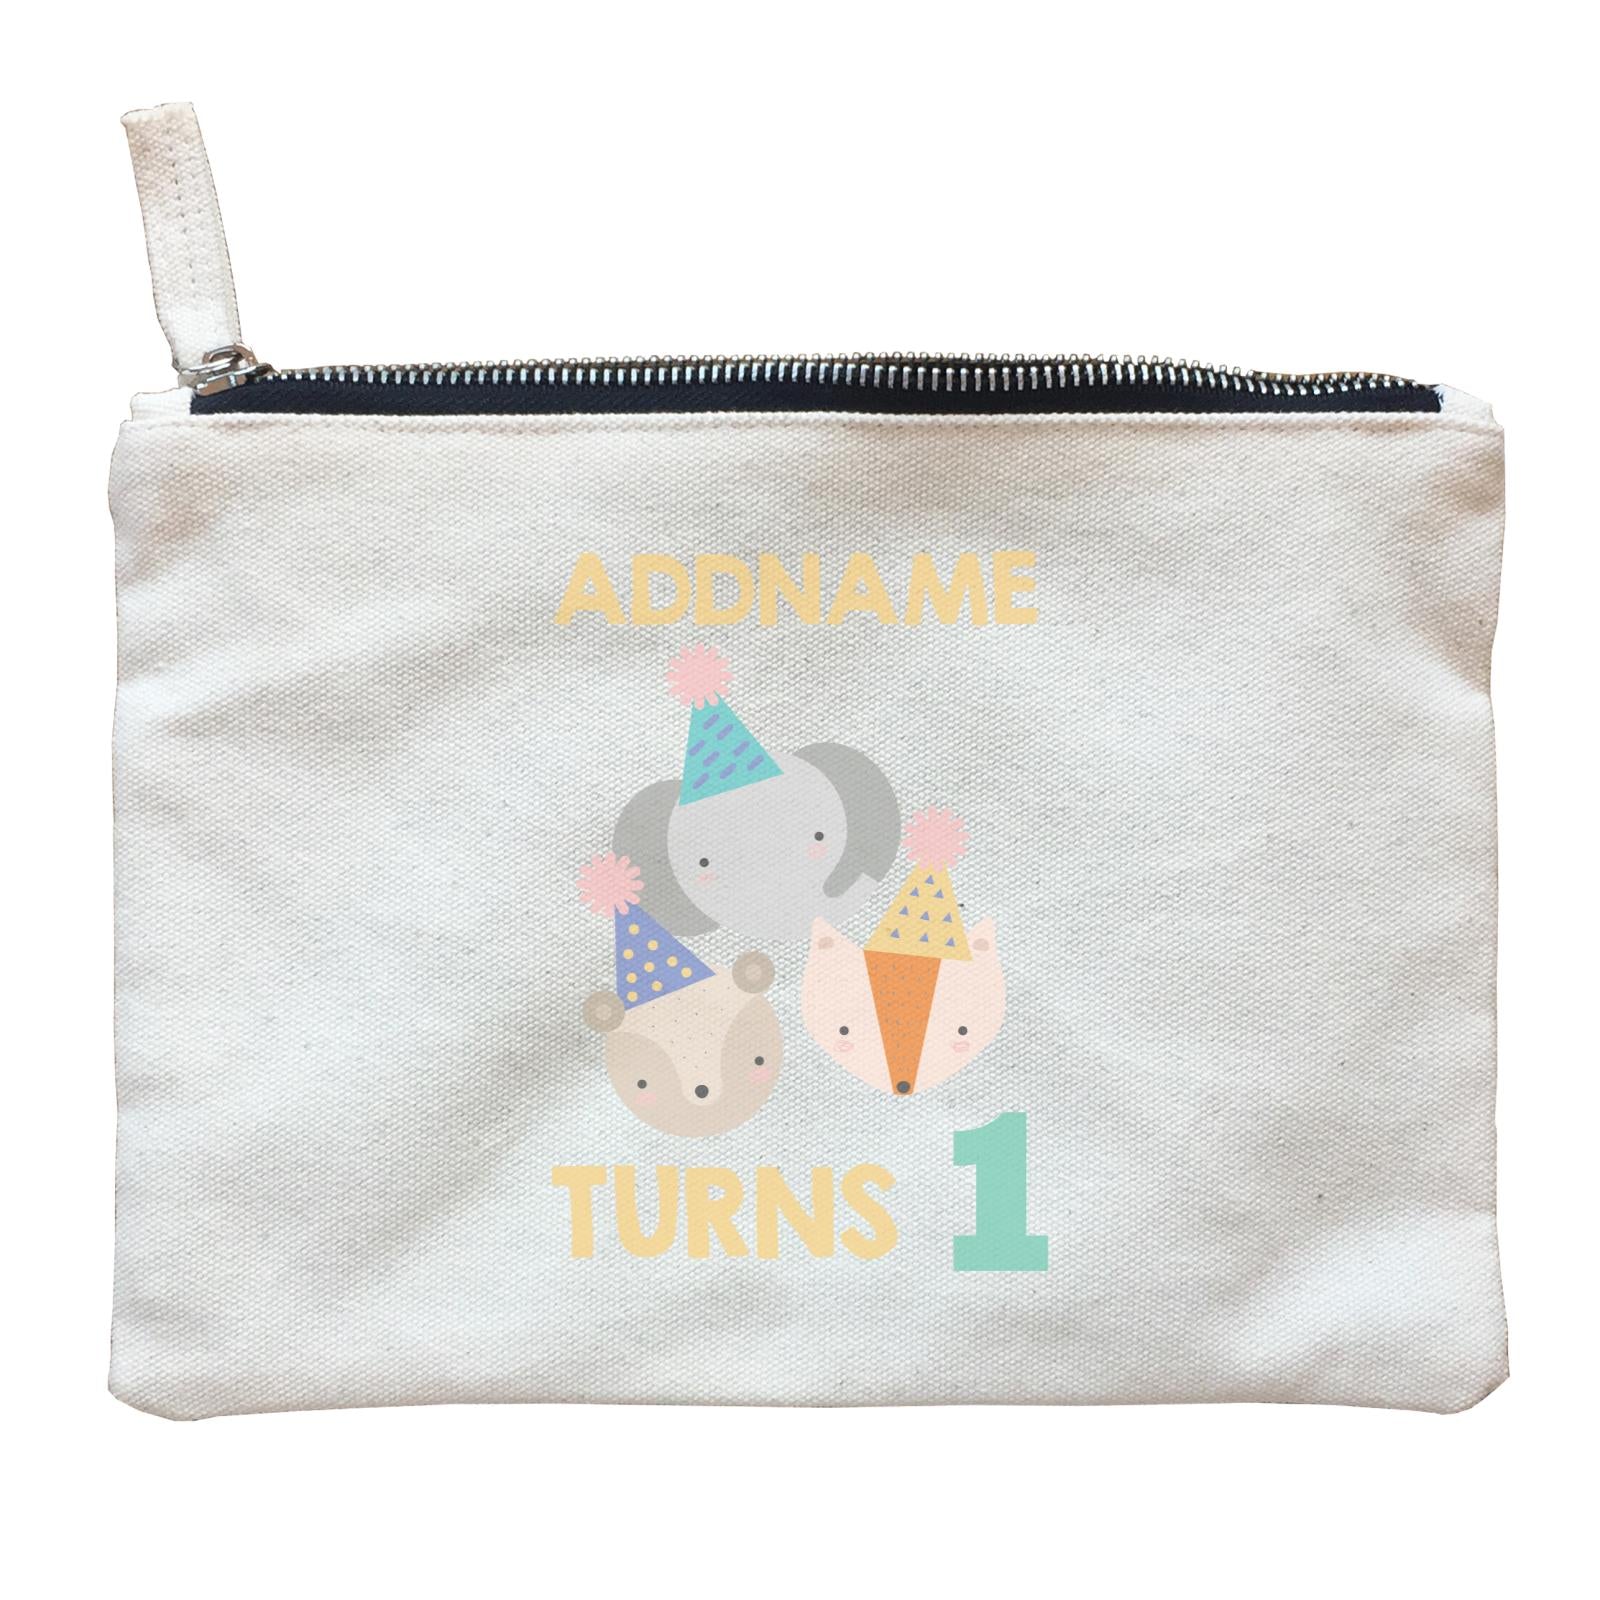 Cute It's My Birthday Safari Theme Personalizable with Name and Number Zipper Pouch